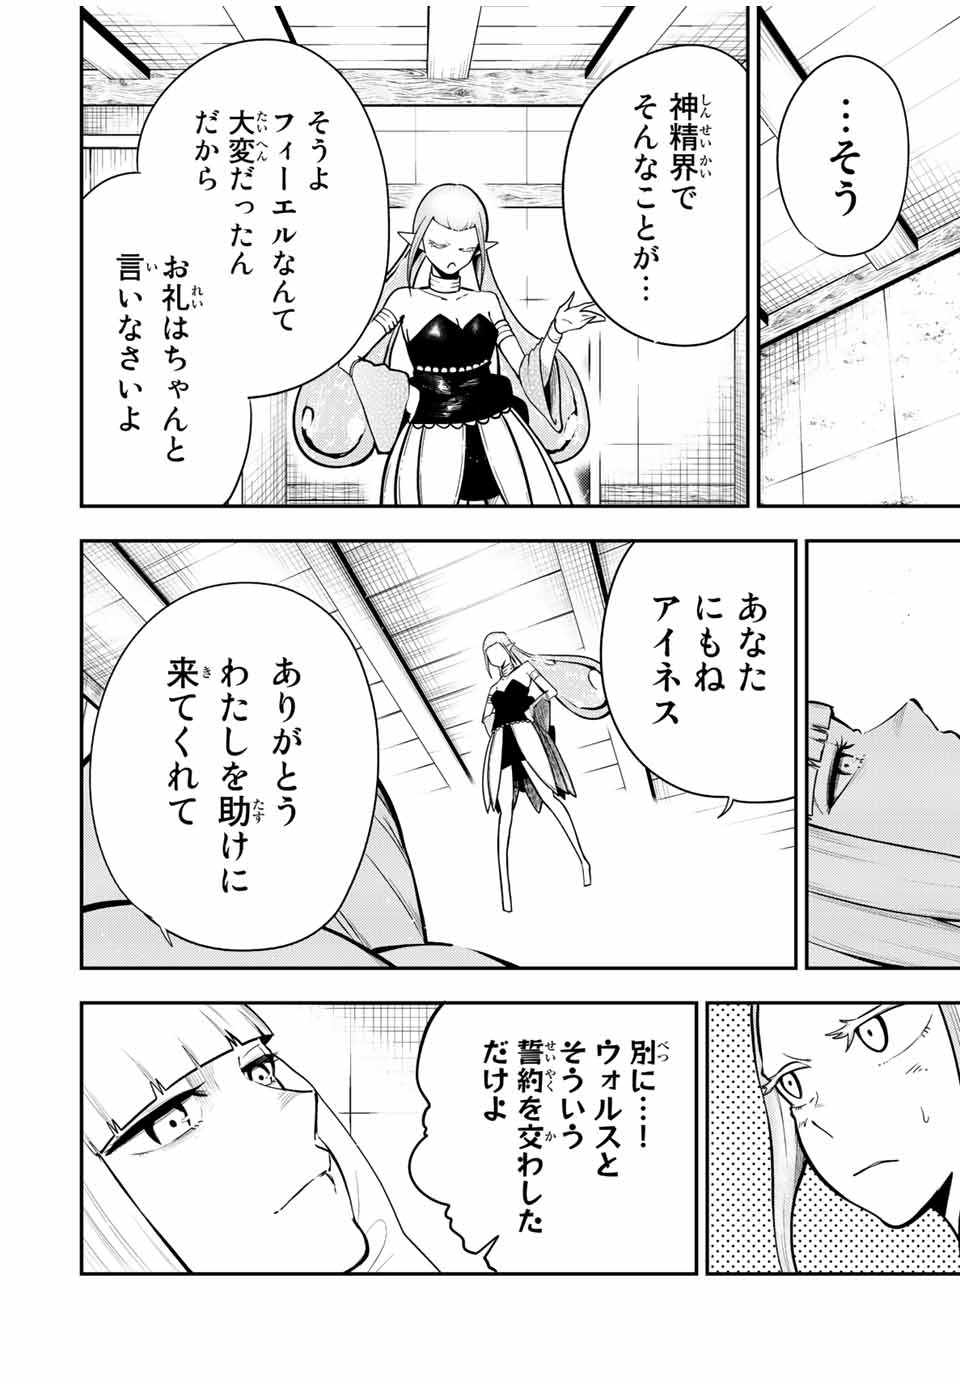 the strongest former prince-; 奴隷転生 ～その奴隷、最強の元王子につき～ 第78話 - Page 16